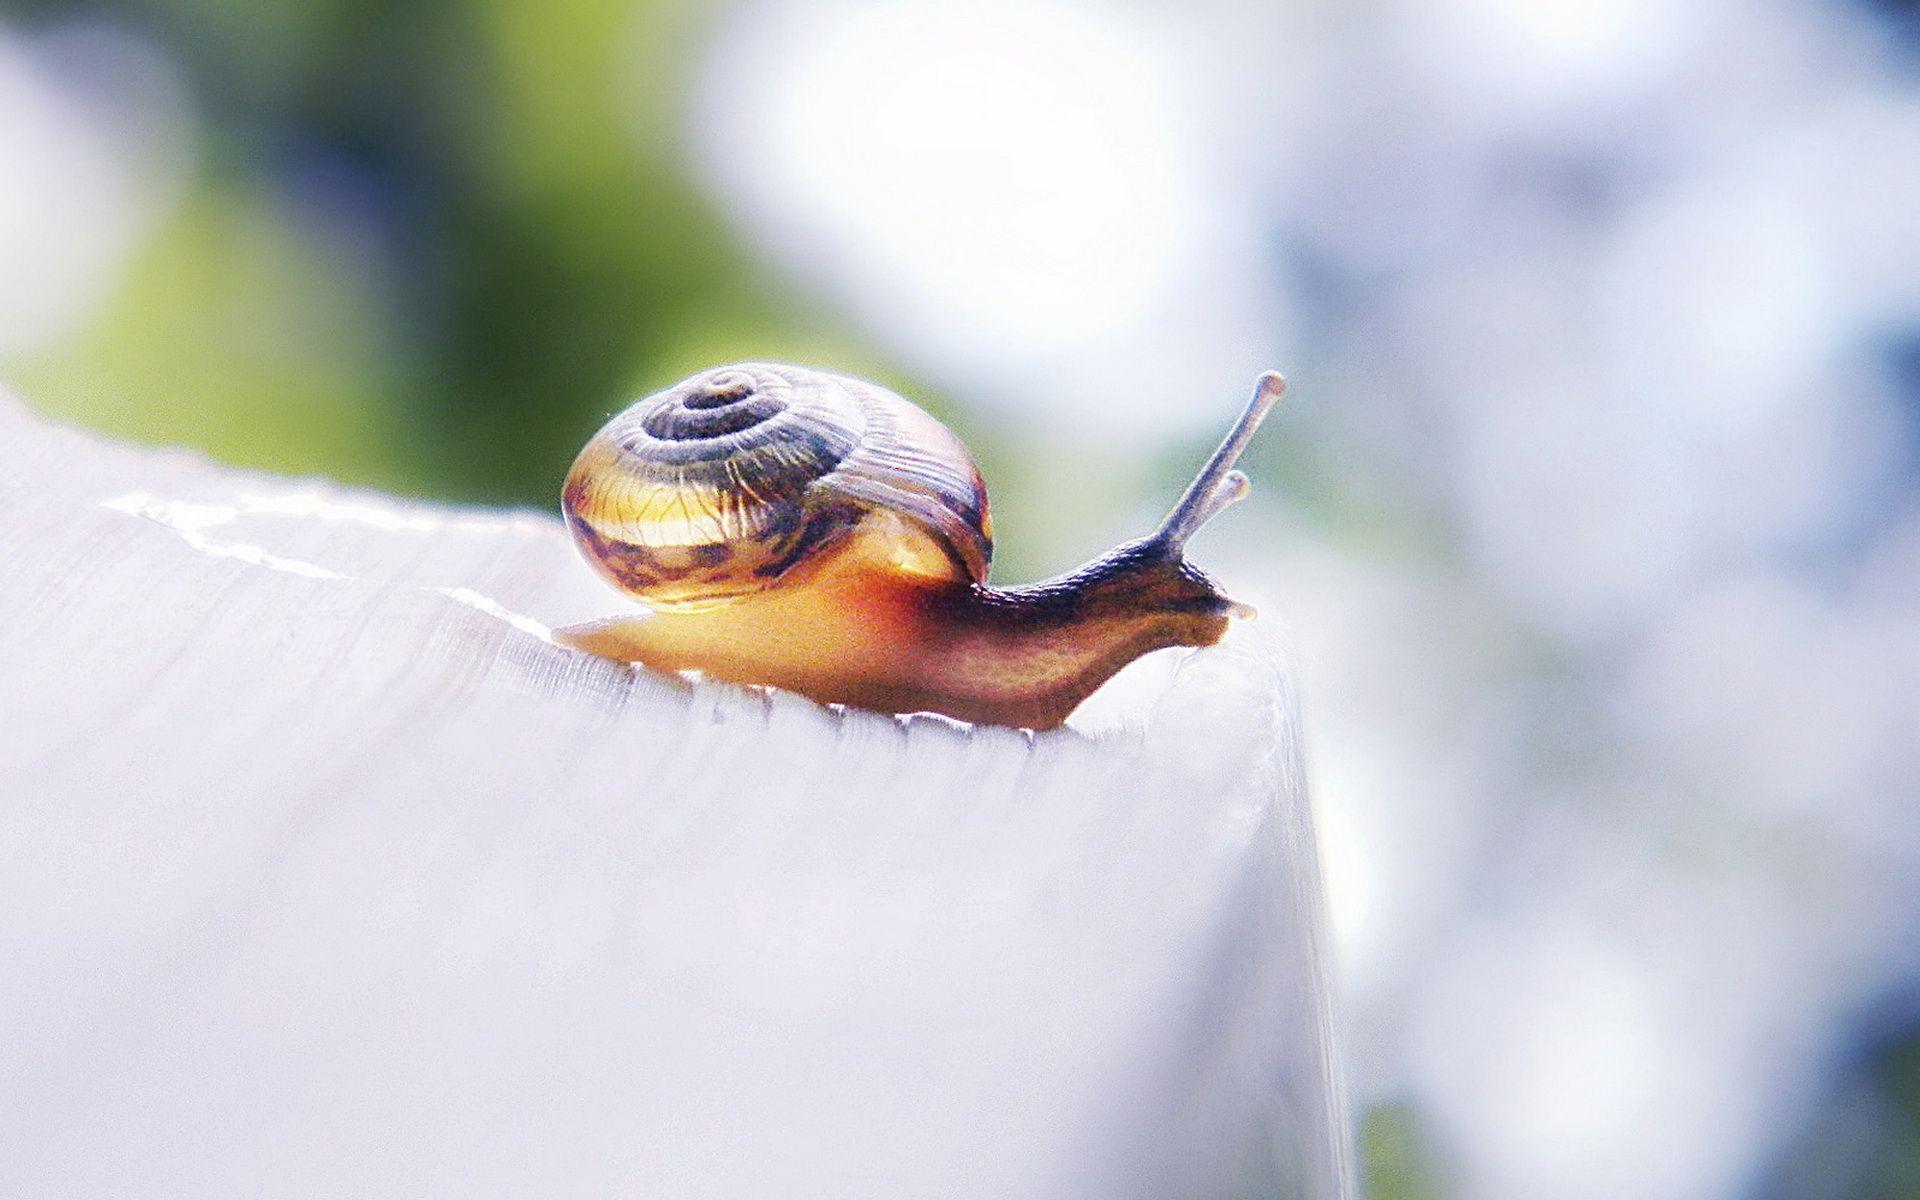 Grape snail wallpaper and image, picture, photo